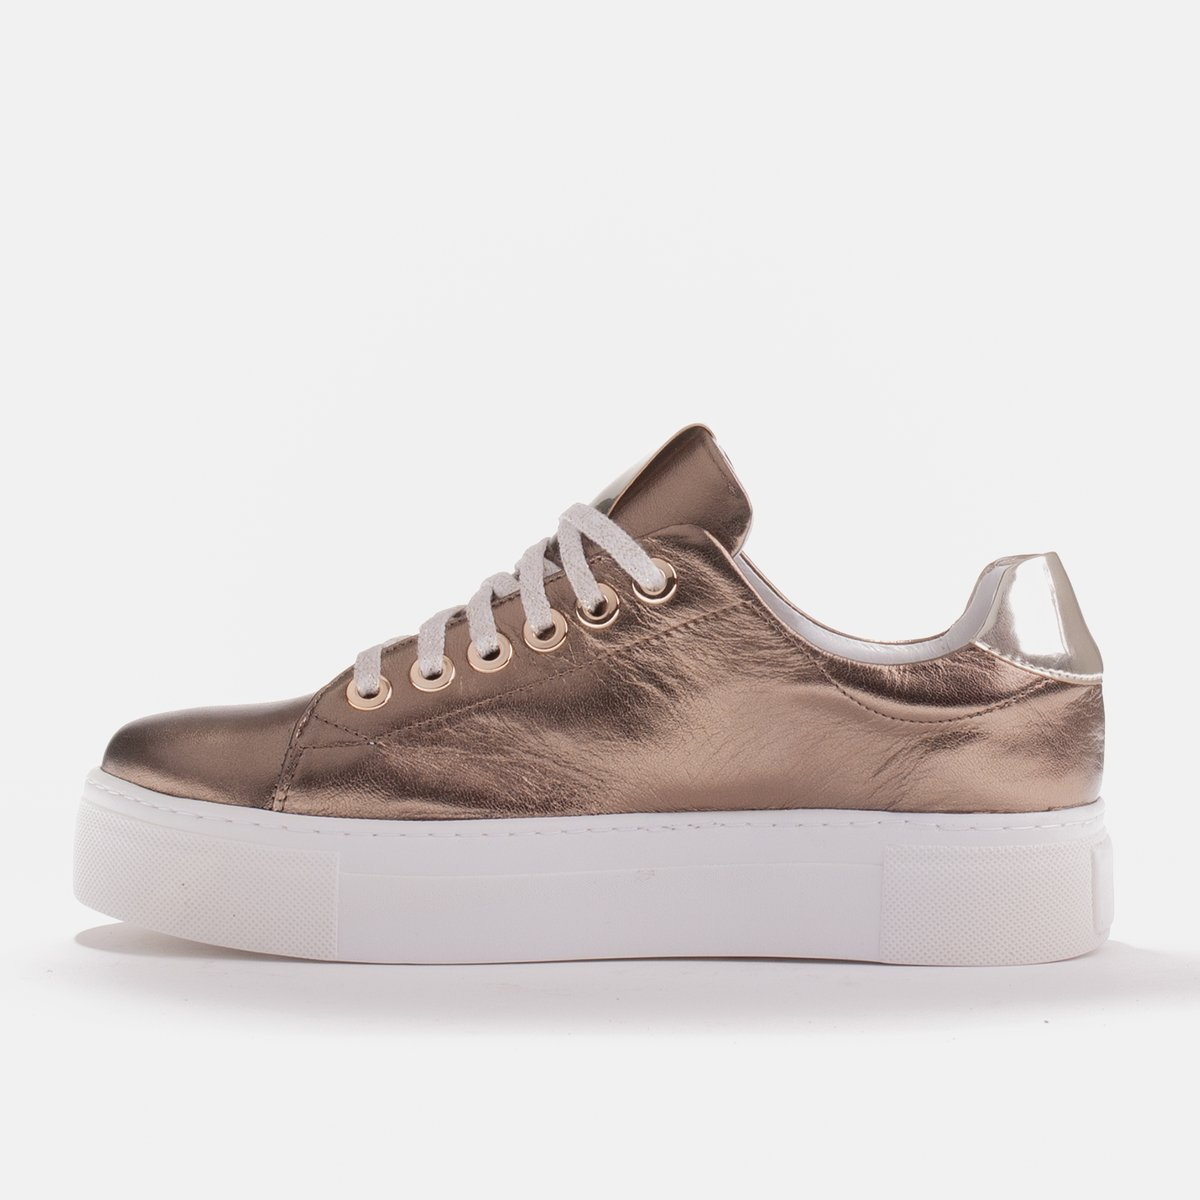 Women's sneakers made of genuine leather on a thick sole